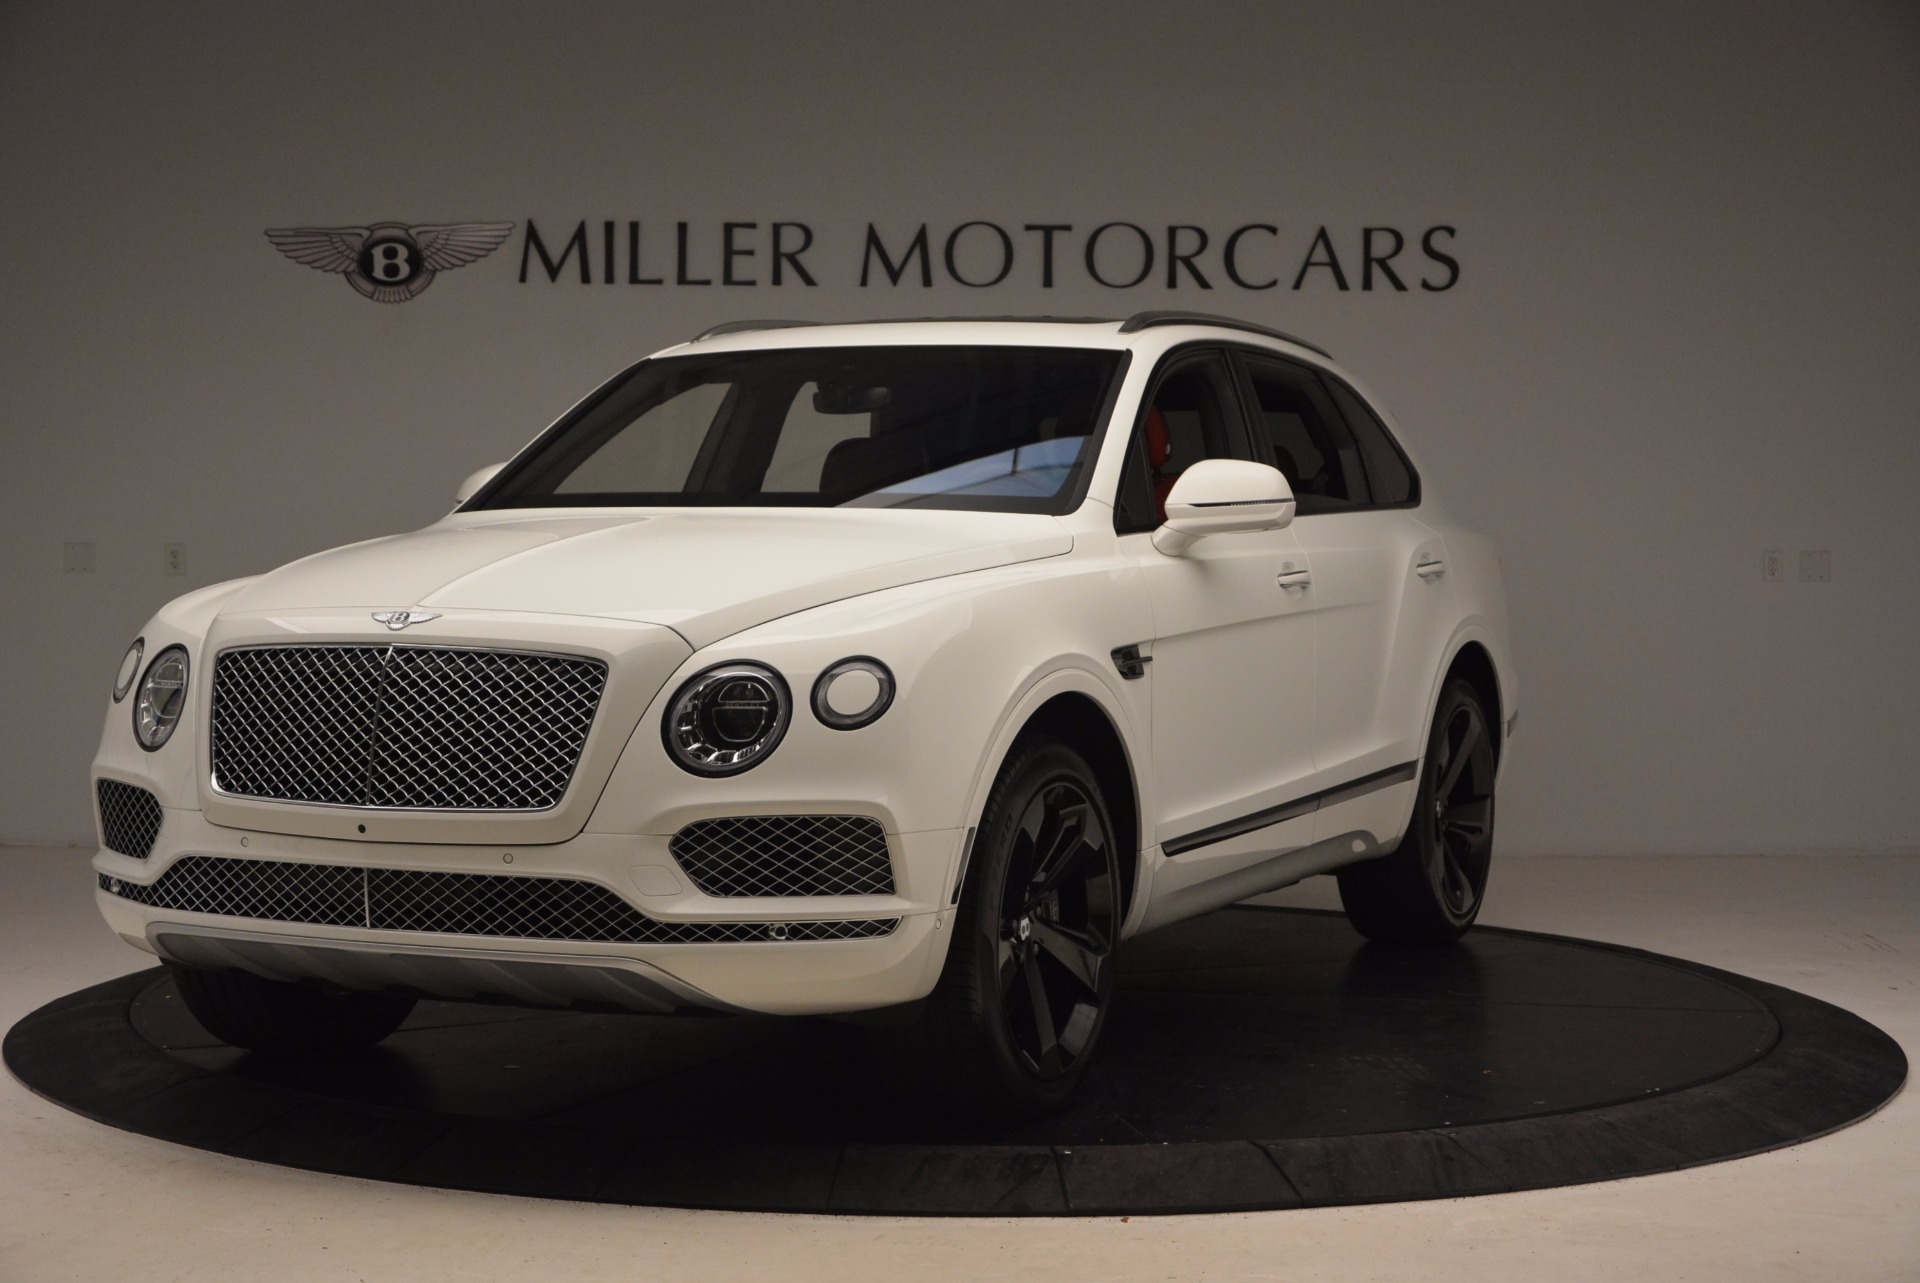 Used 2018 Bentley Bentayga Signature for sale Sold at Alfa Romeo of Greenwich in Greenwich CT 06830 1